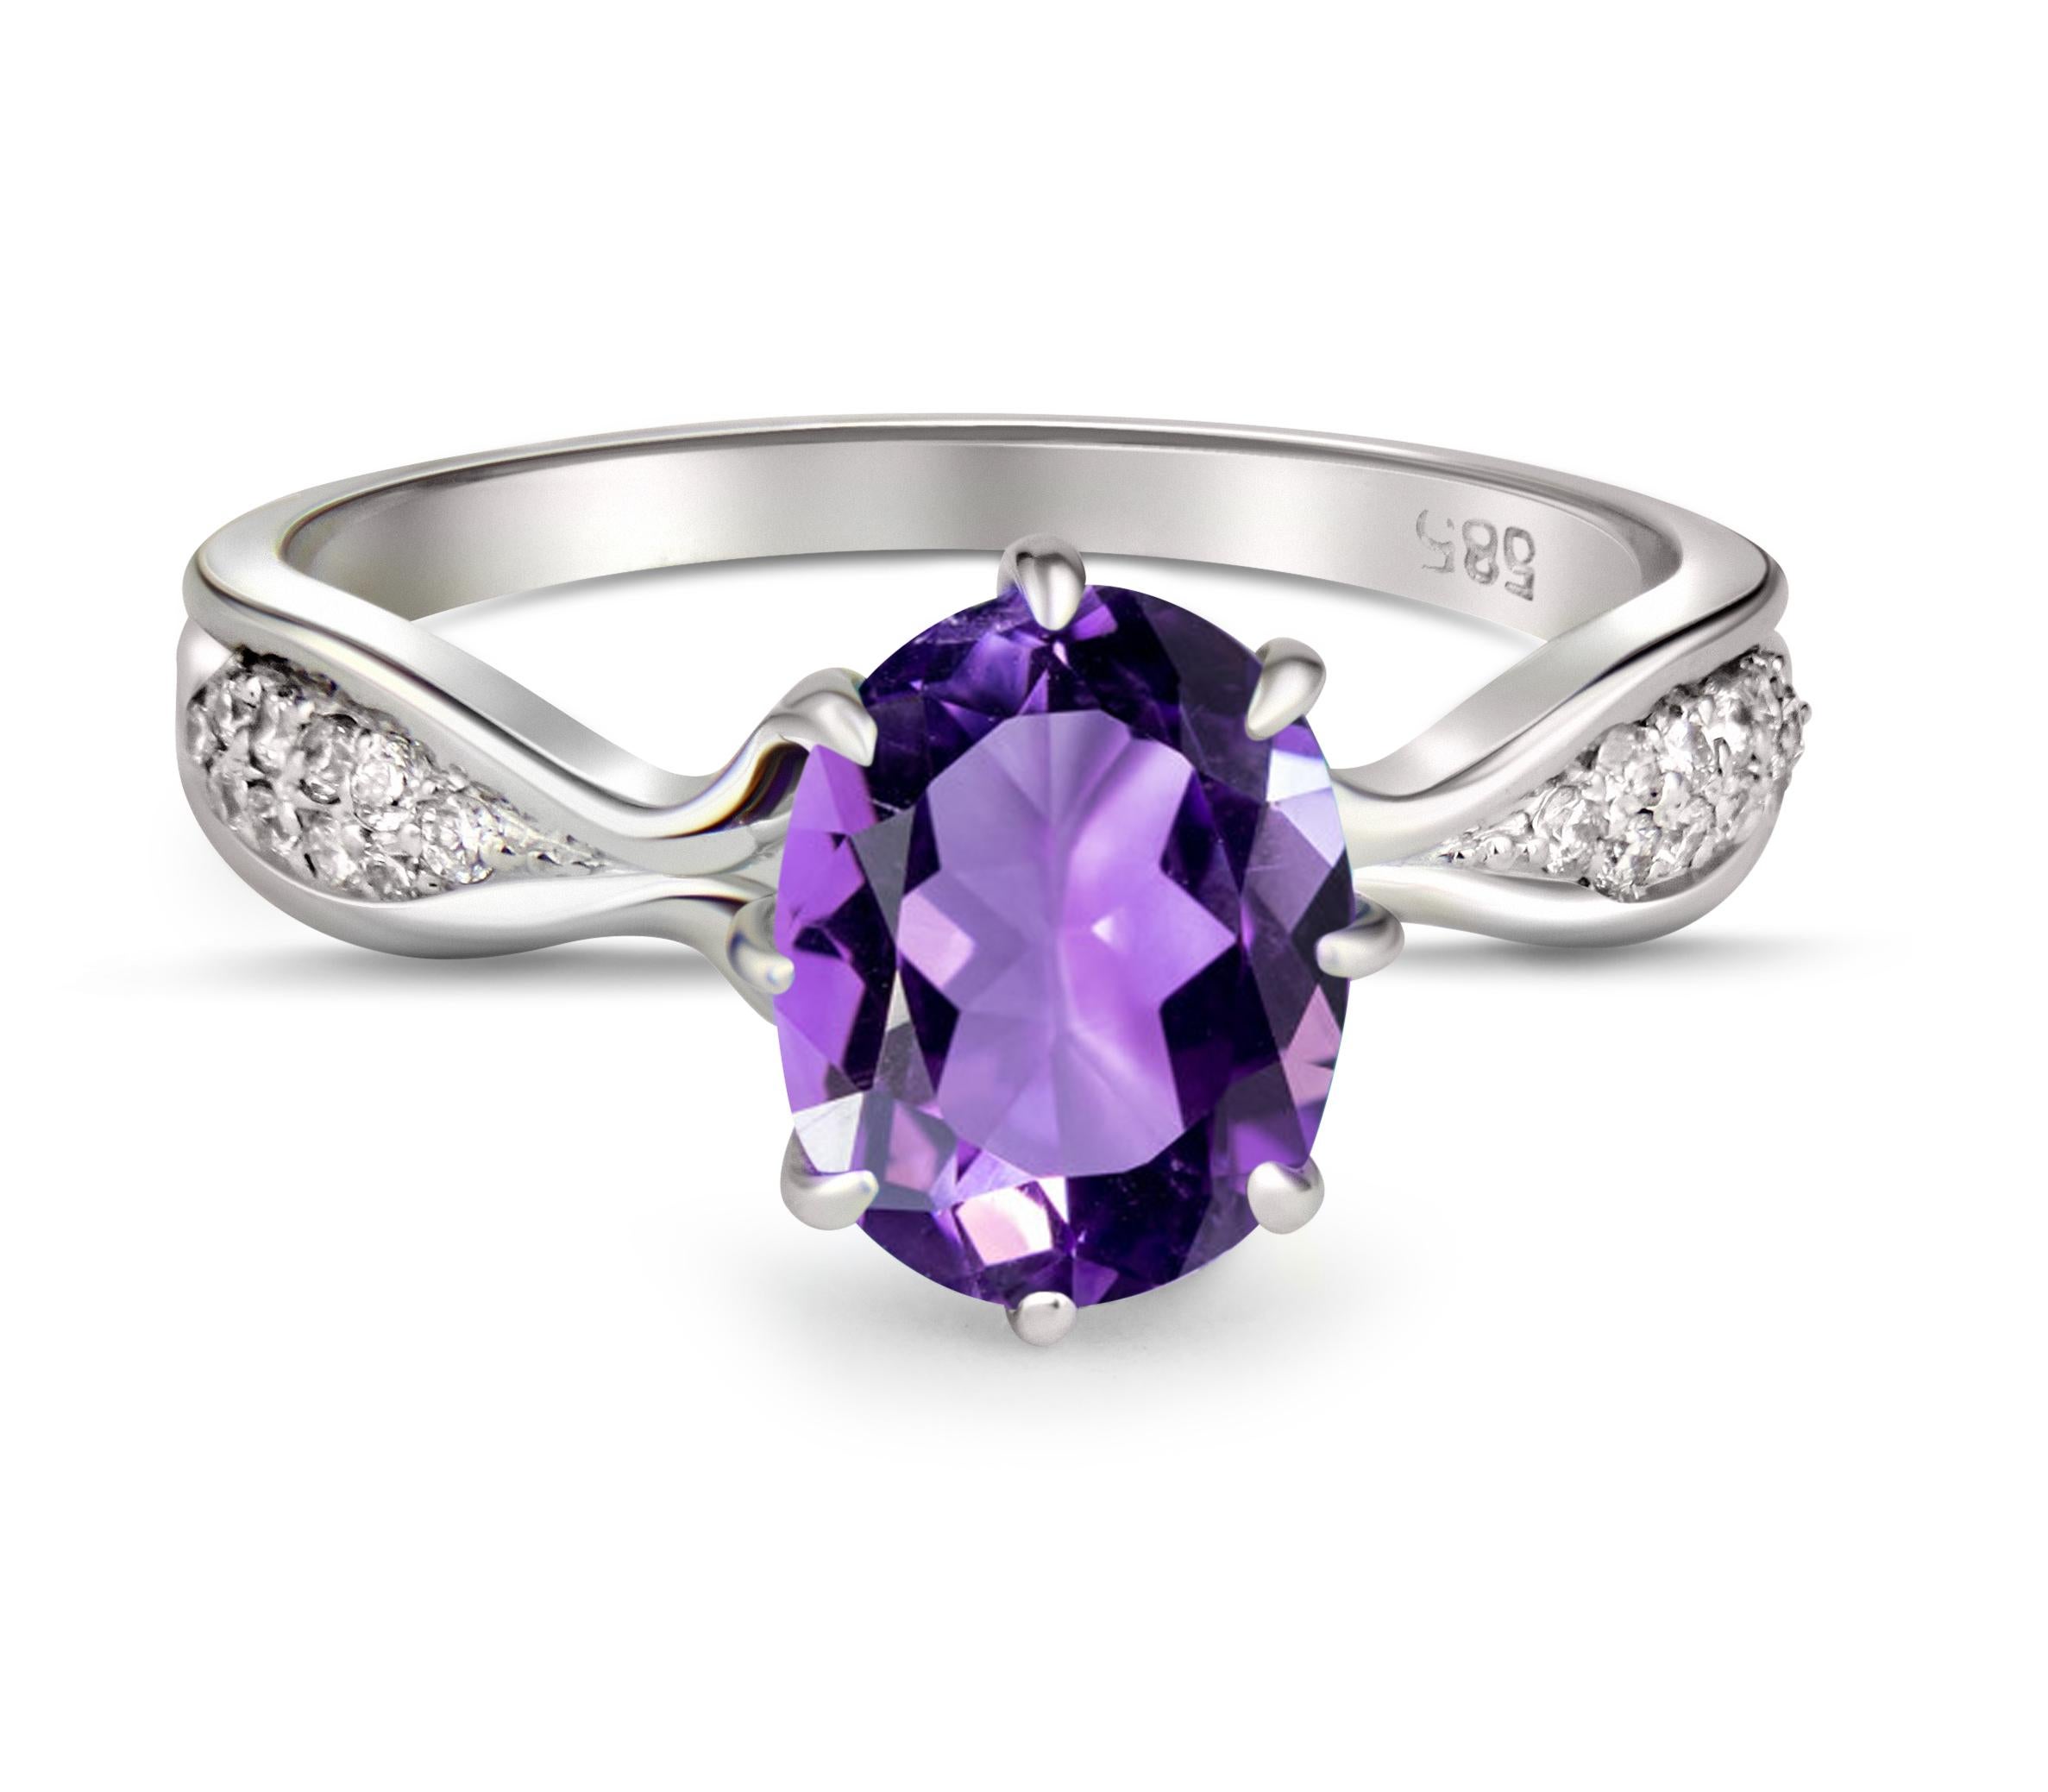 Amethyst 14k gold ring. 
Oval amethyst ring. Amethyst gold ring. Amethyst vintage ring. Amethyst engagement ring. February birthstone ring.

Metal: 14k solid gold
Weight: 2.1 g (depends from size)

Main stone - amethyst, purple color, oval cut, 1 ct